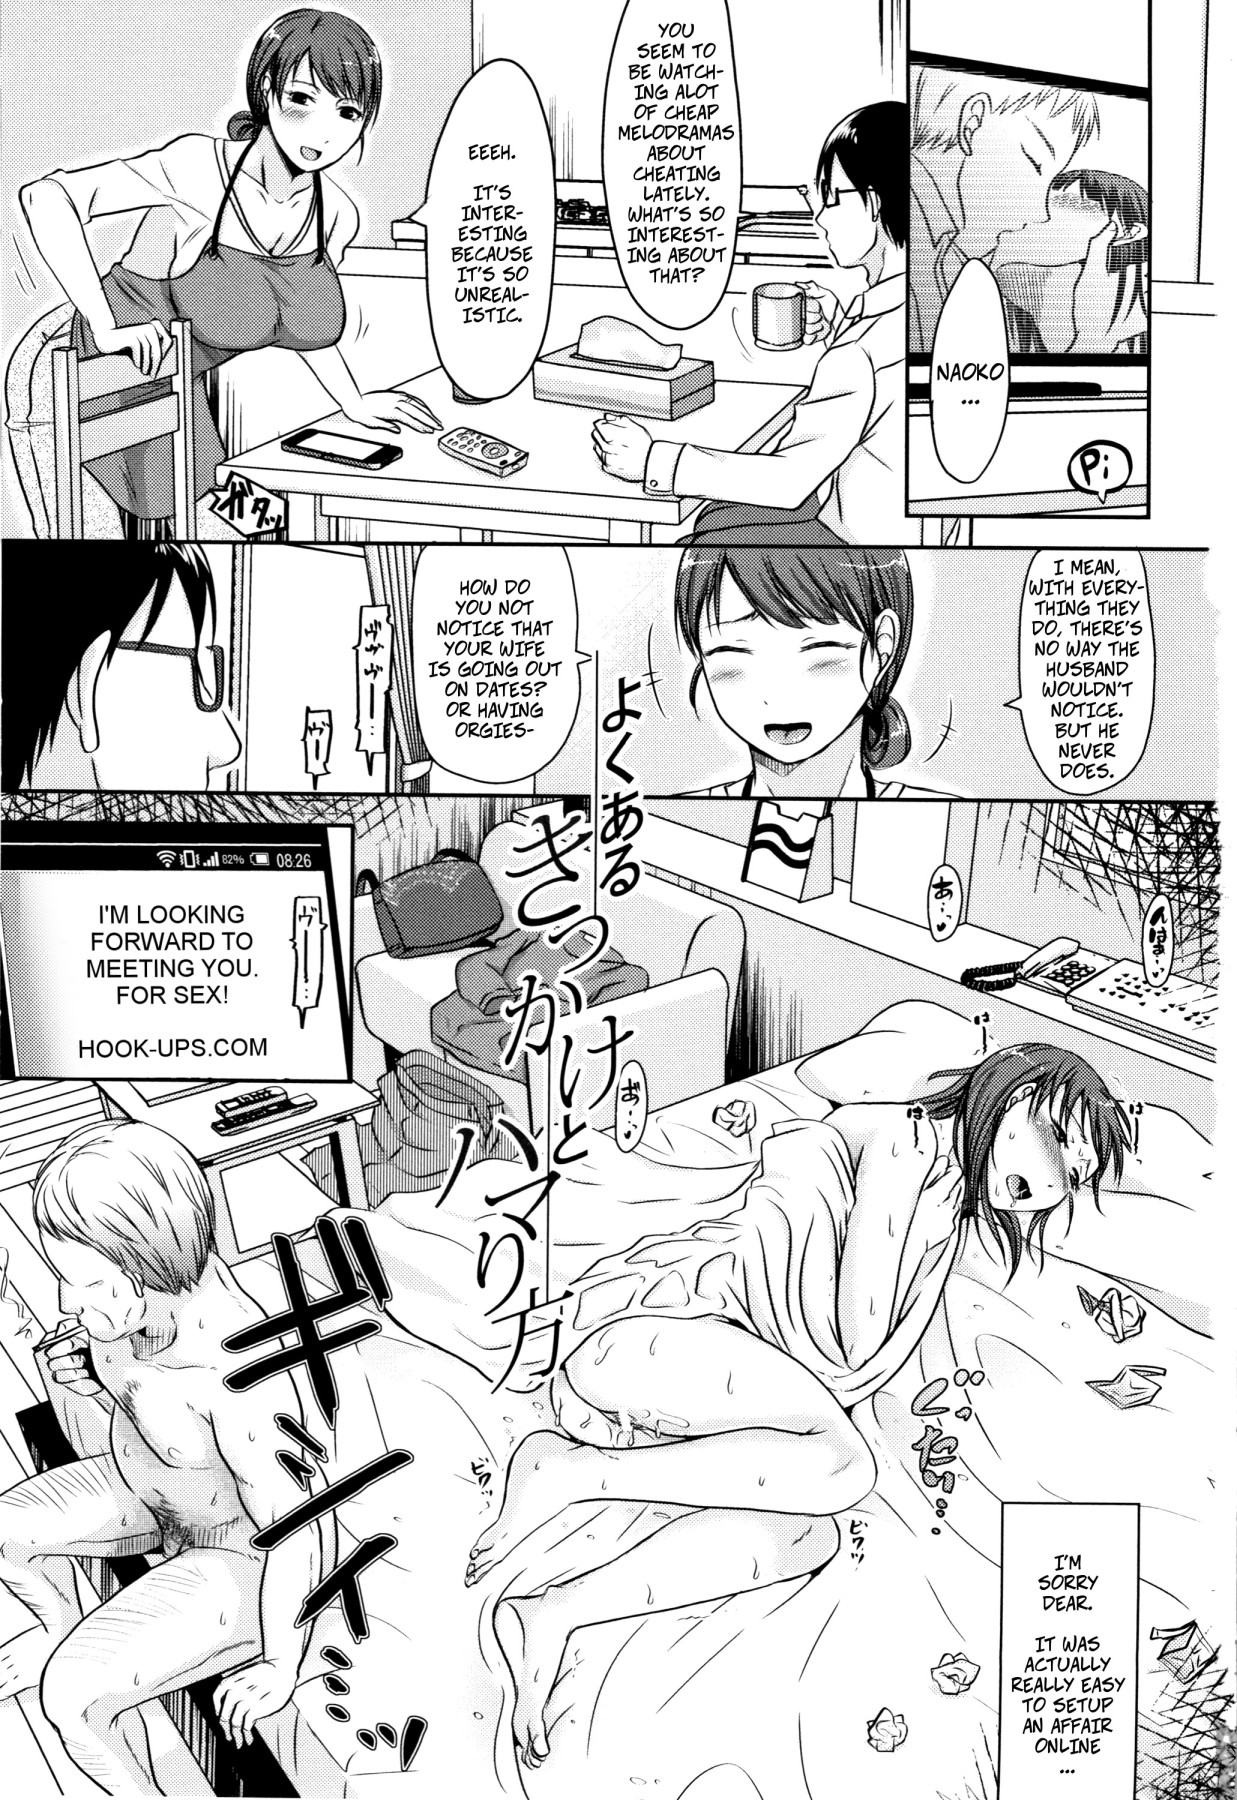 Hentai Manga Comic-Wife's Cheating Vacation 1: Opportunities and Addictions-Read-1